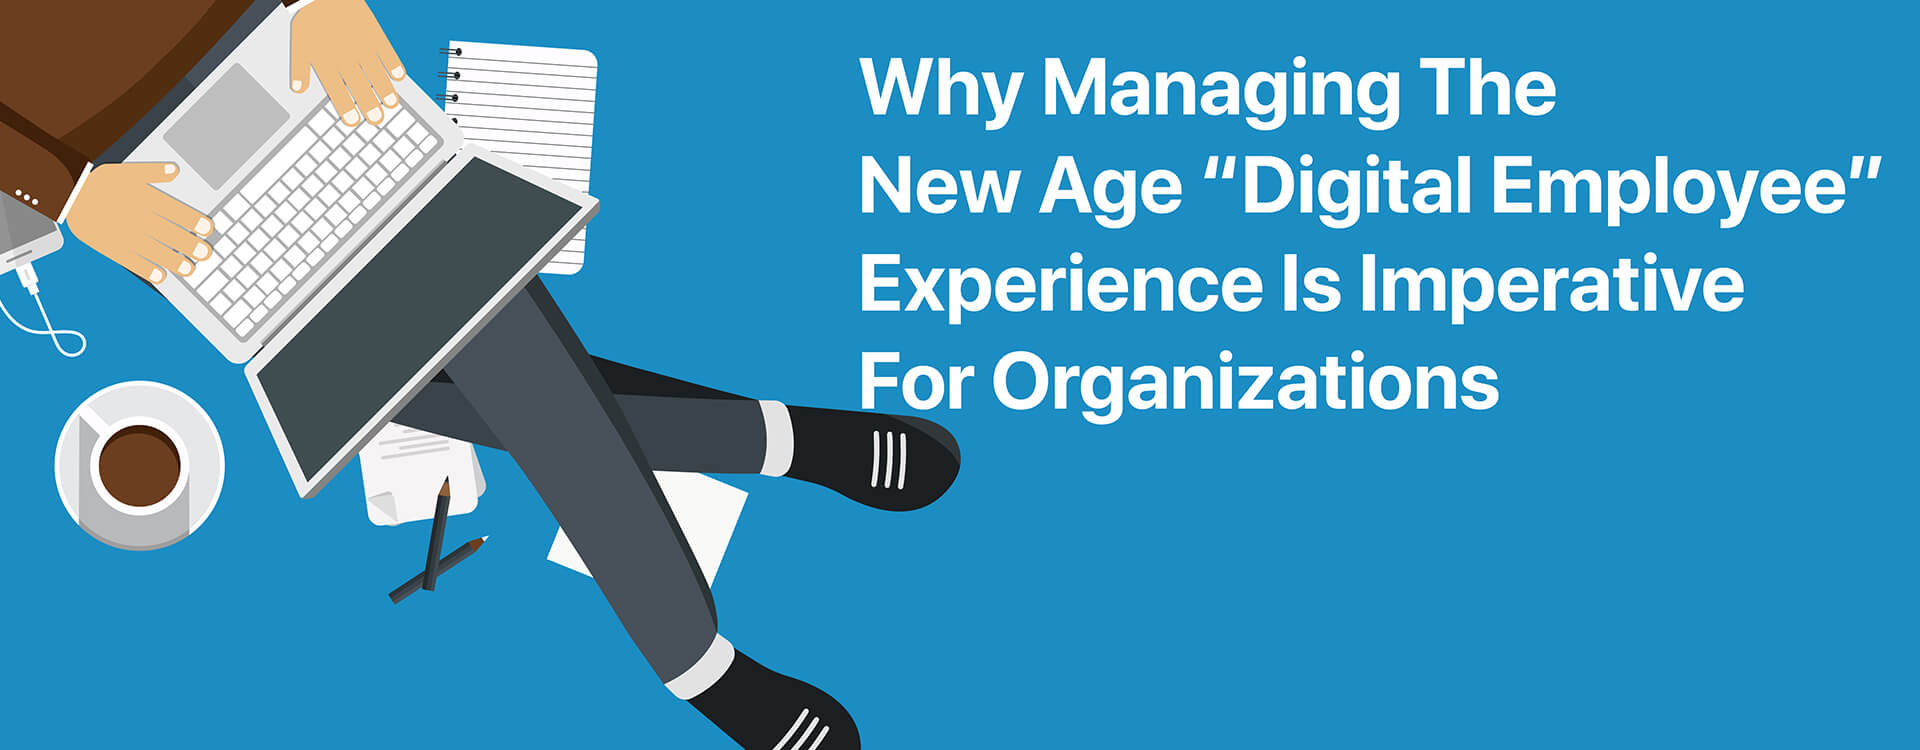 Digital employee experience for organisations